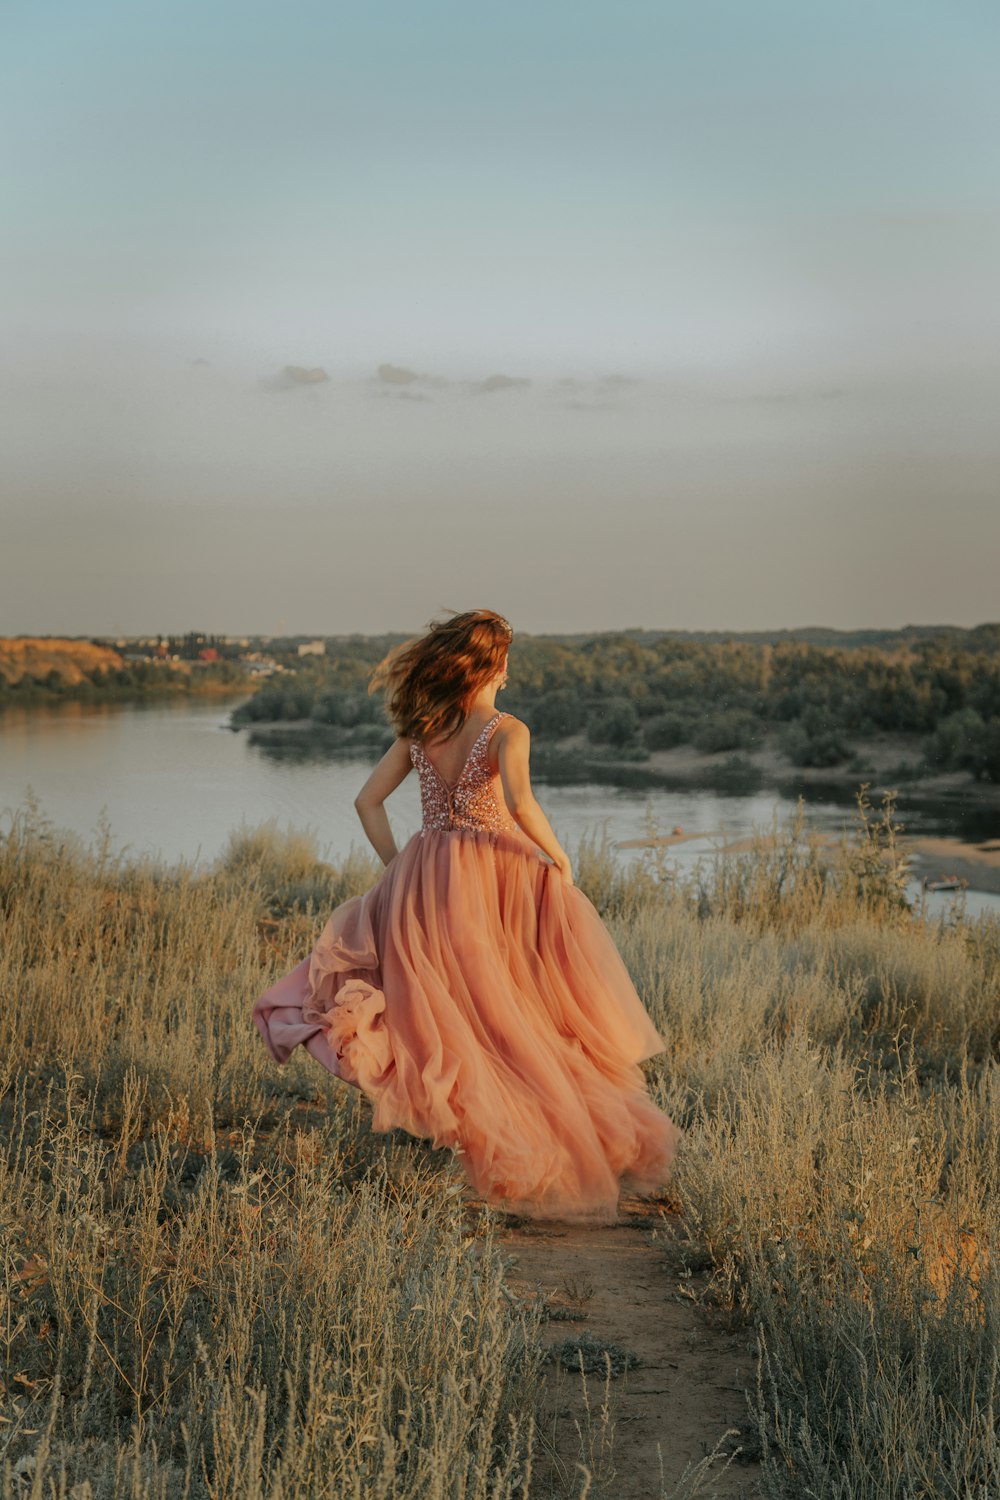 woman in pink dress standing on brown grass field near lake during daytime